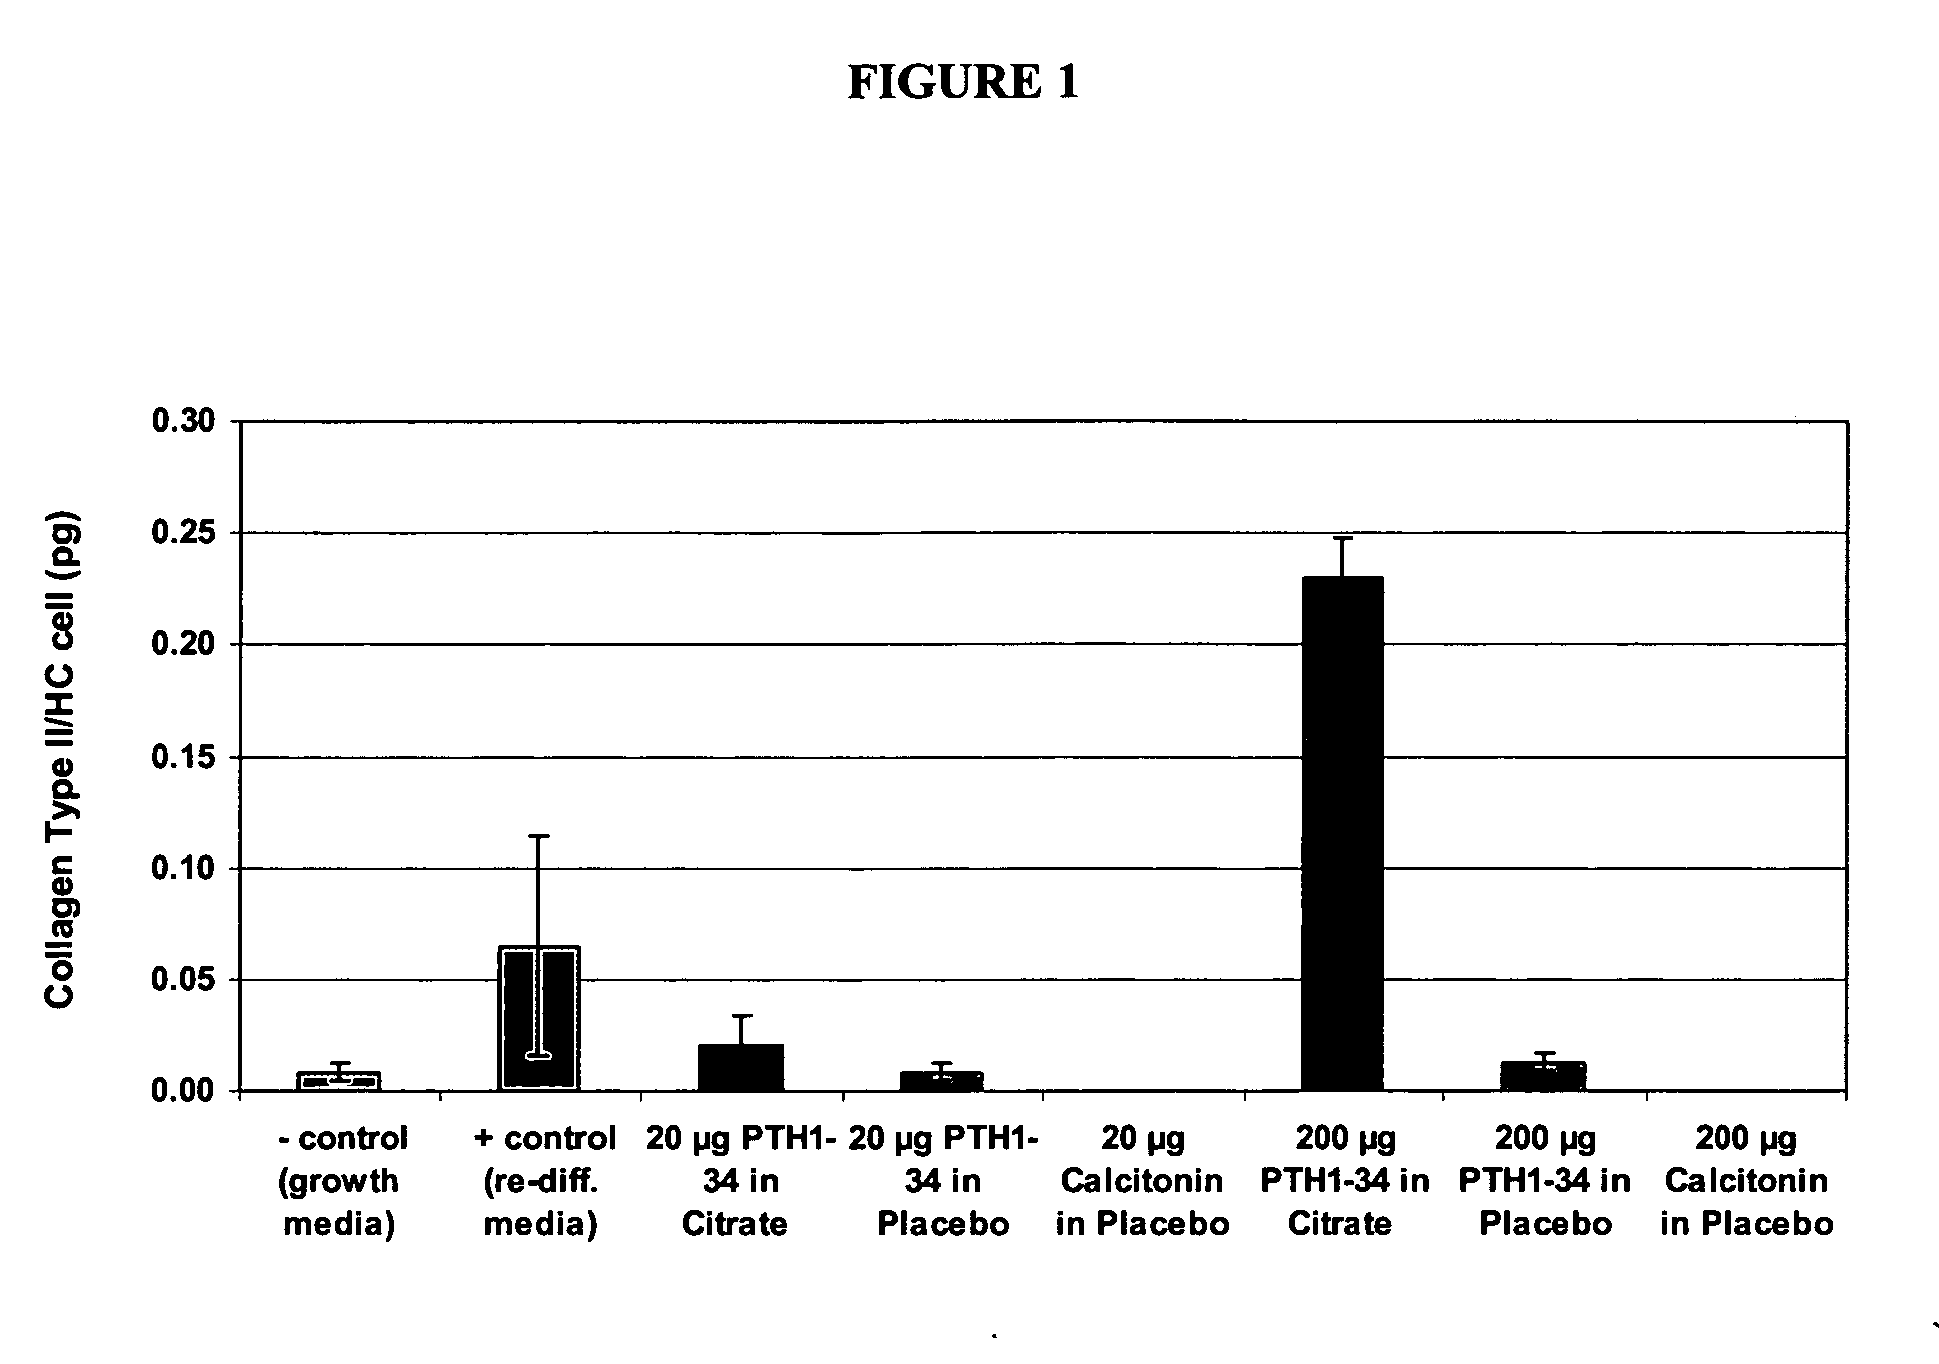 Compositions and methods for intranasal administration of inactive analogs of PTH or inactivated preparations of PTH or PTH analogs